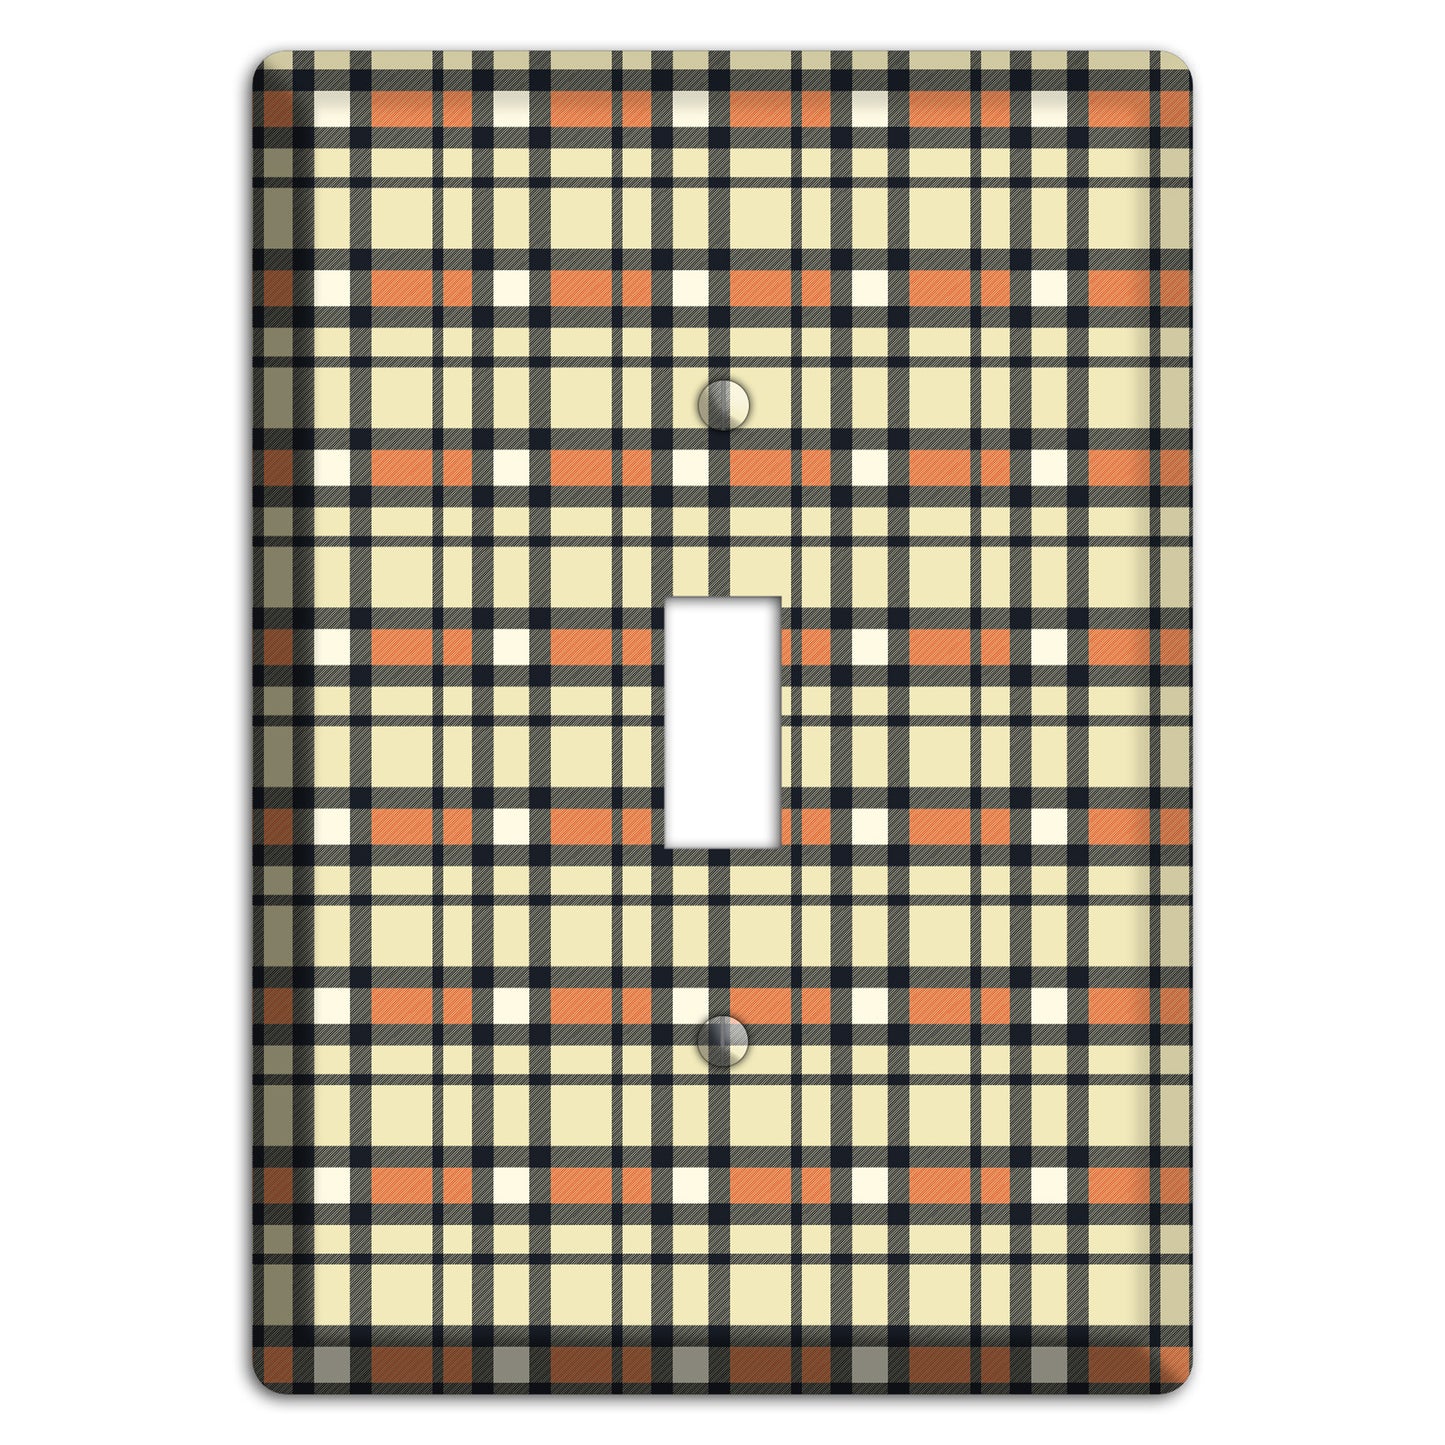 Beige and Brown Plaid Cover Plates